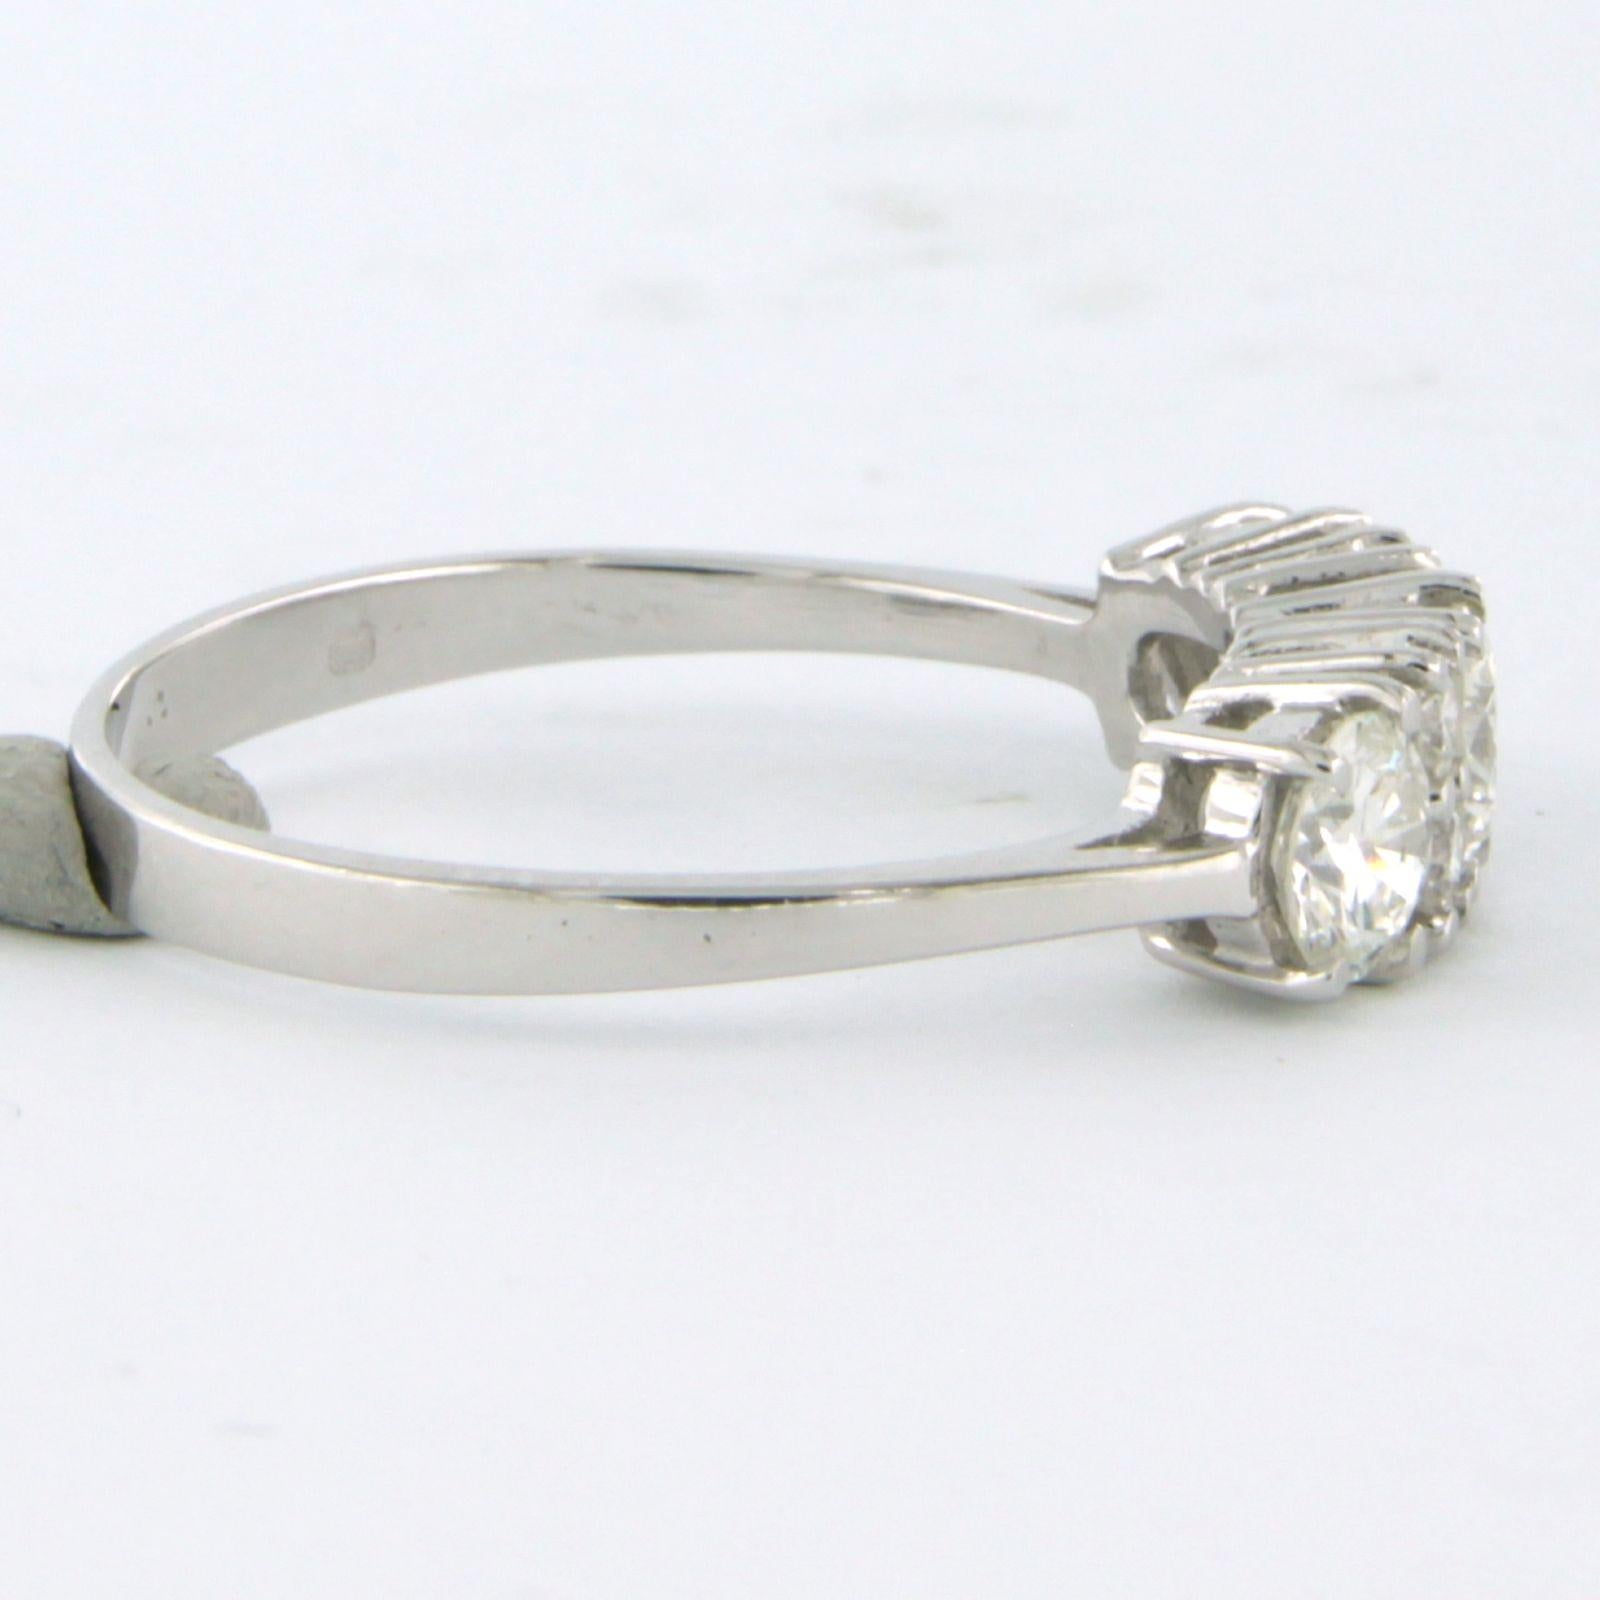 Women's Fashion Ring with diamonds up to 1.00ct. 18k white gold For Sale